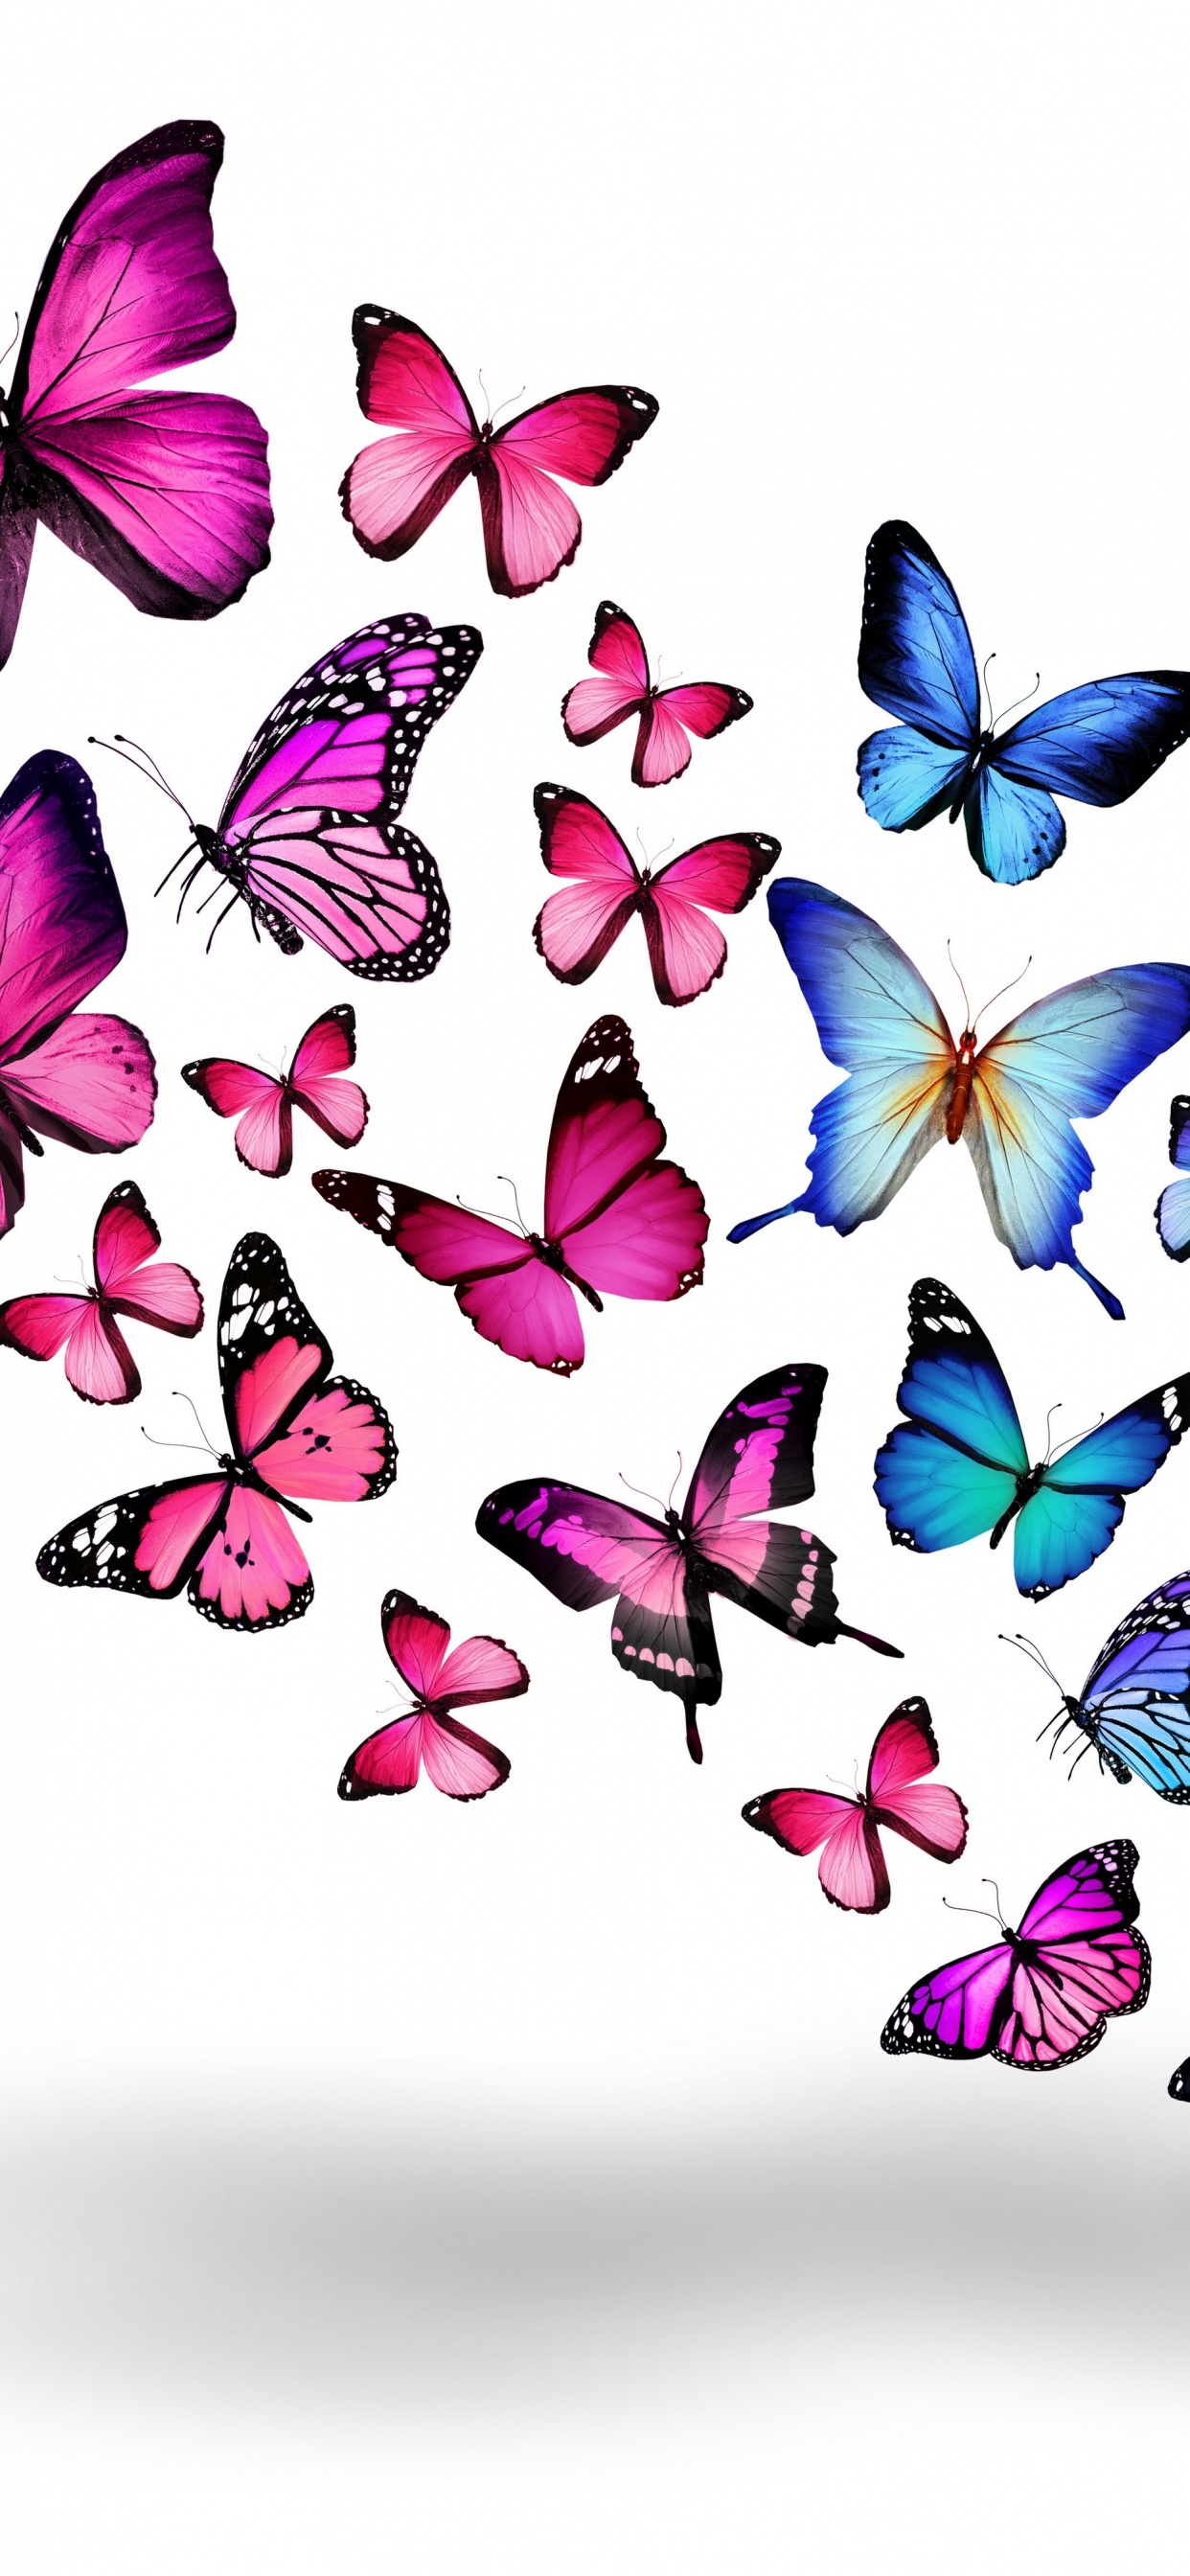 Blue and Purple Butterflies on White Background. Wallpaper in 1242x2688 Resolution